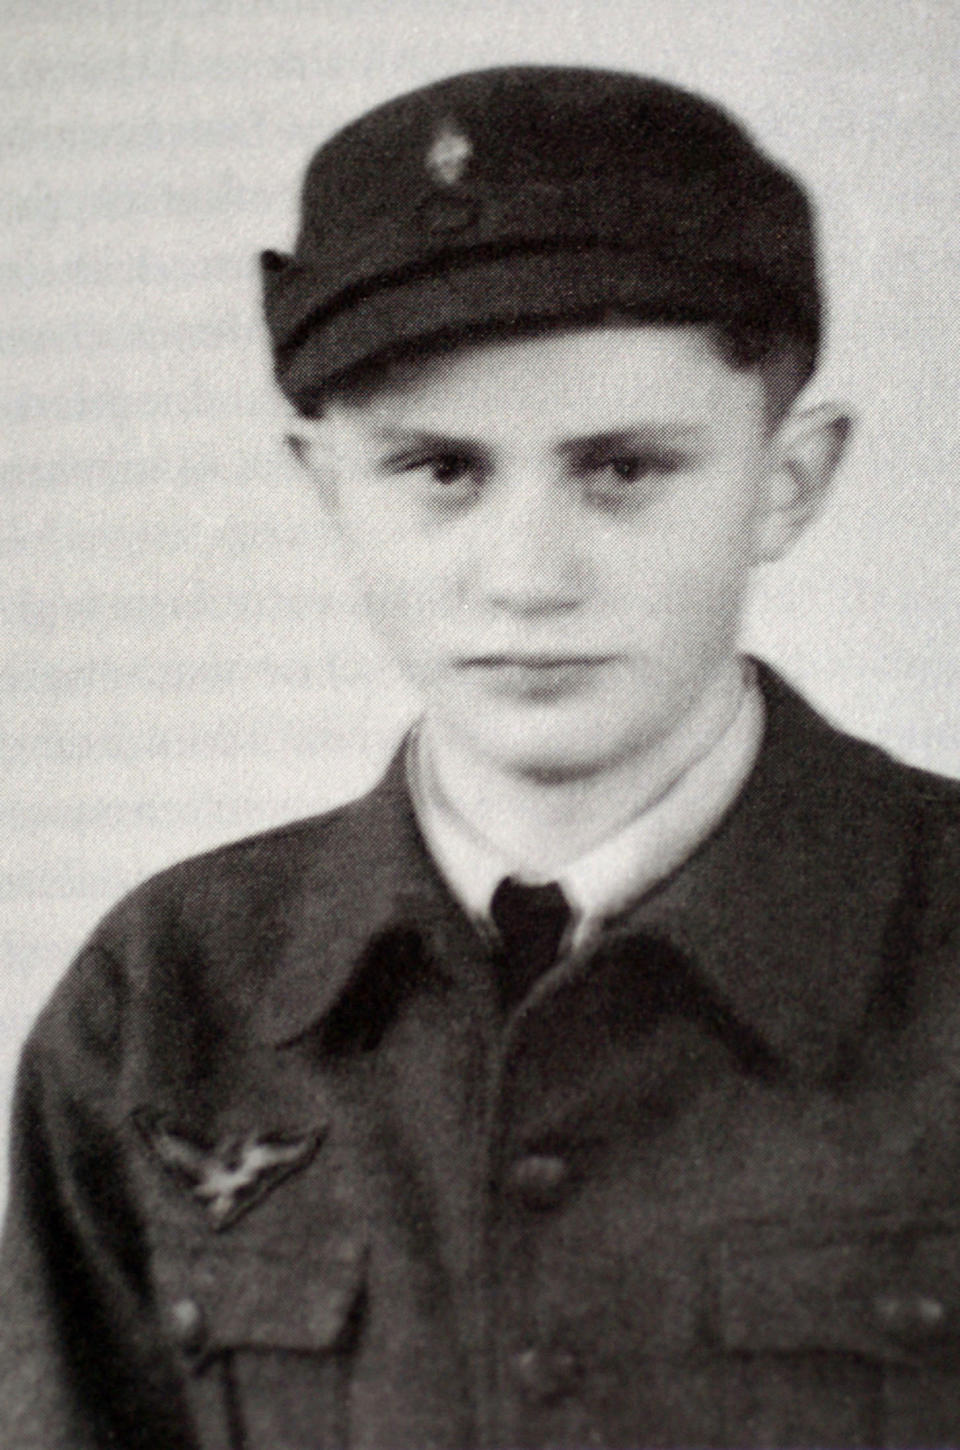 Benedict in 1943 as a German air force assistant